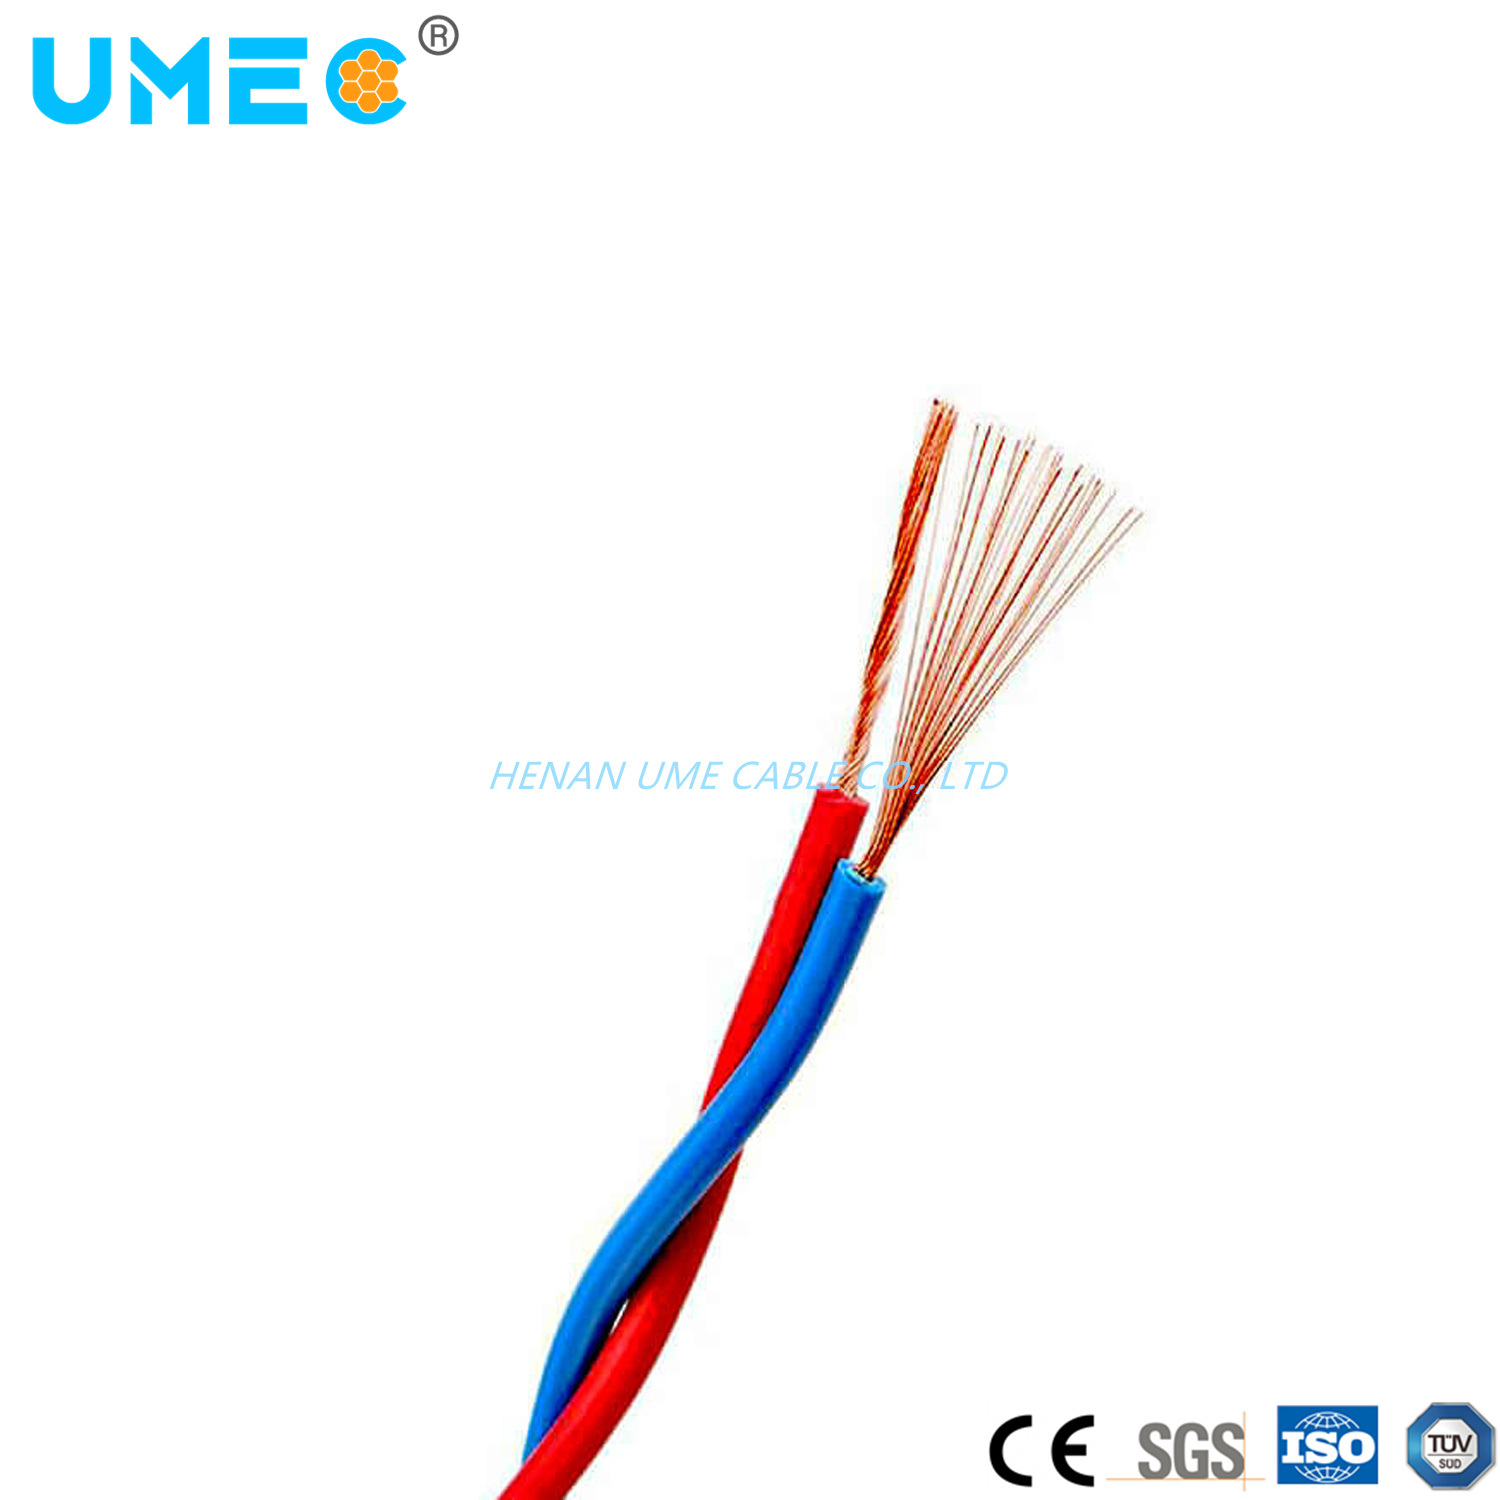 Fire Rated Anneal Copper Conductor PVC Insulated Flexible Cable Rvs 14 Gauge 1.5mm Twisted Wire Pair Flexible Rvs